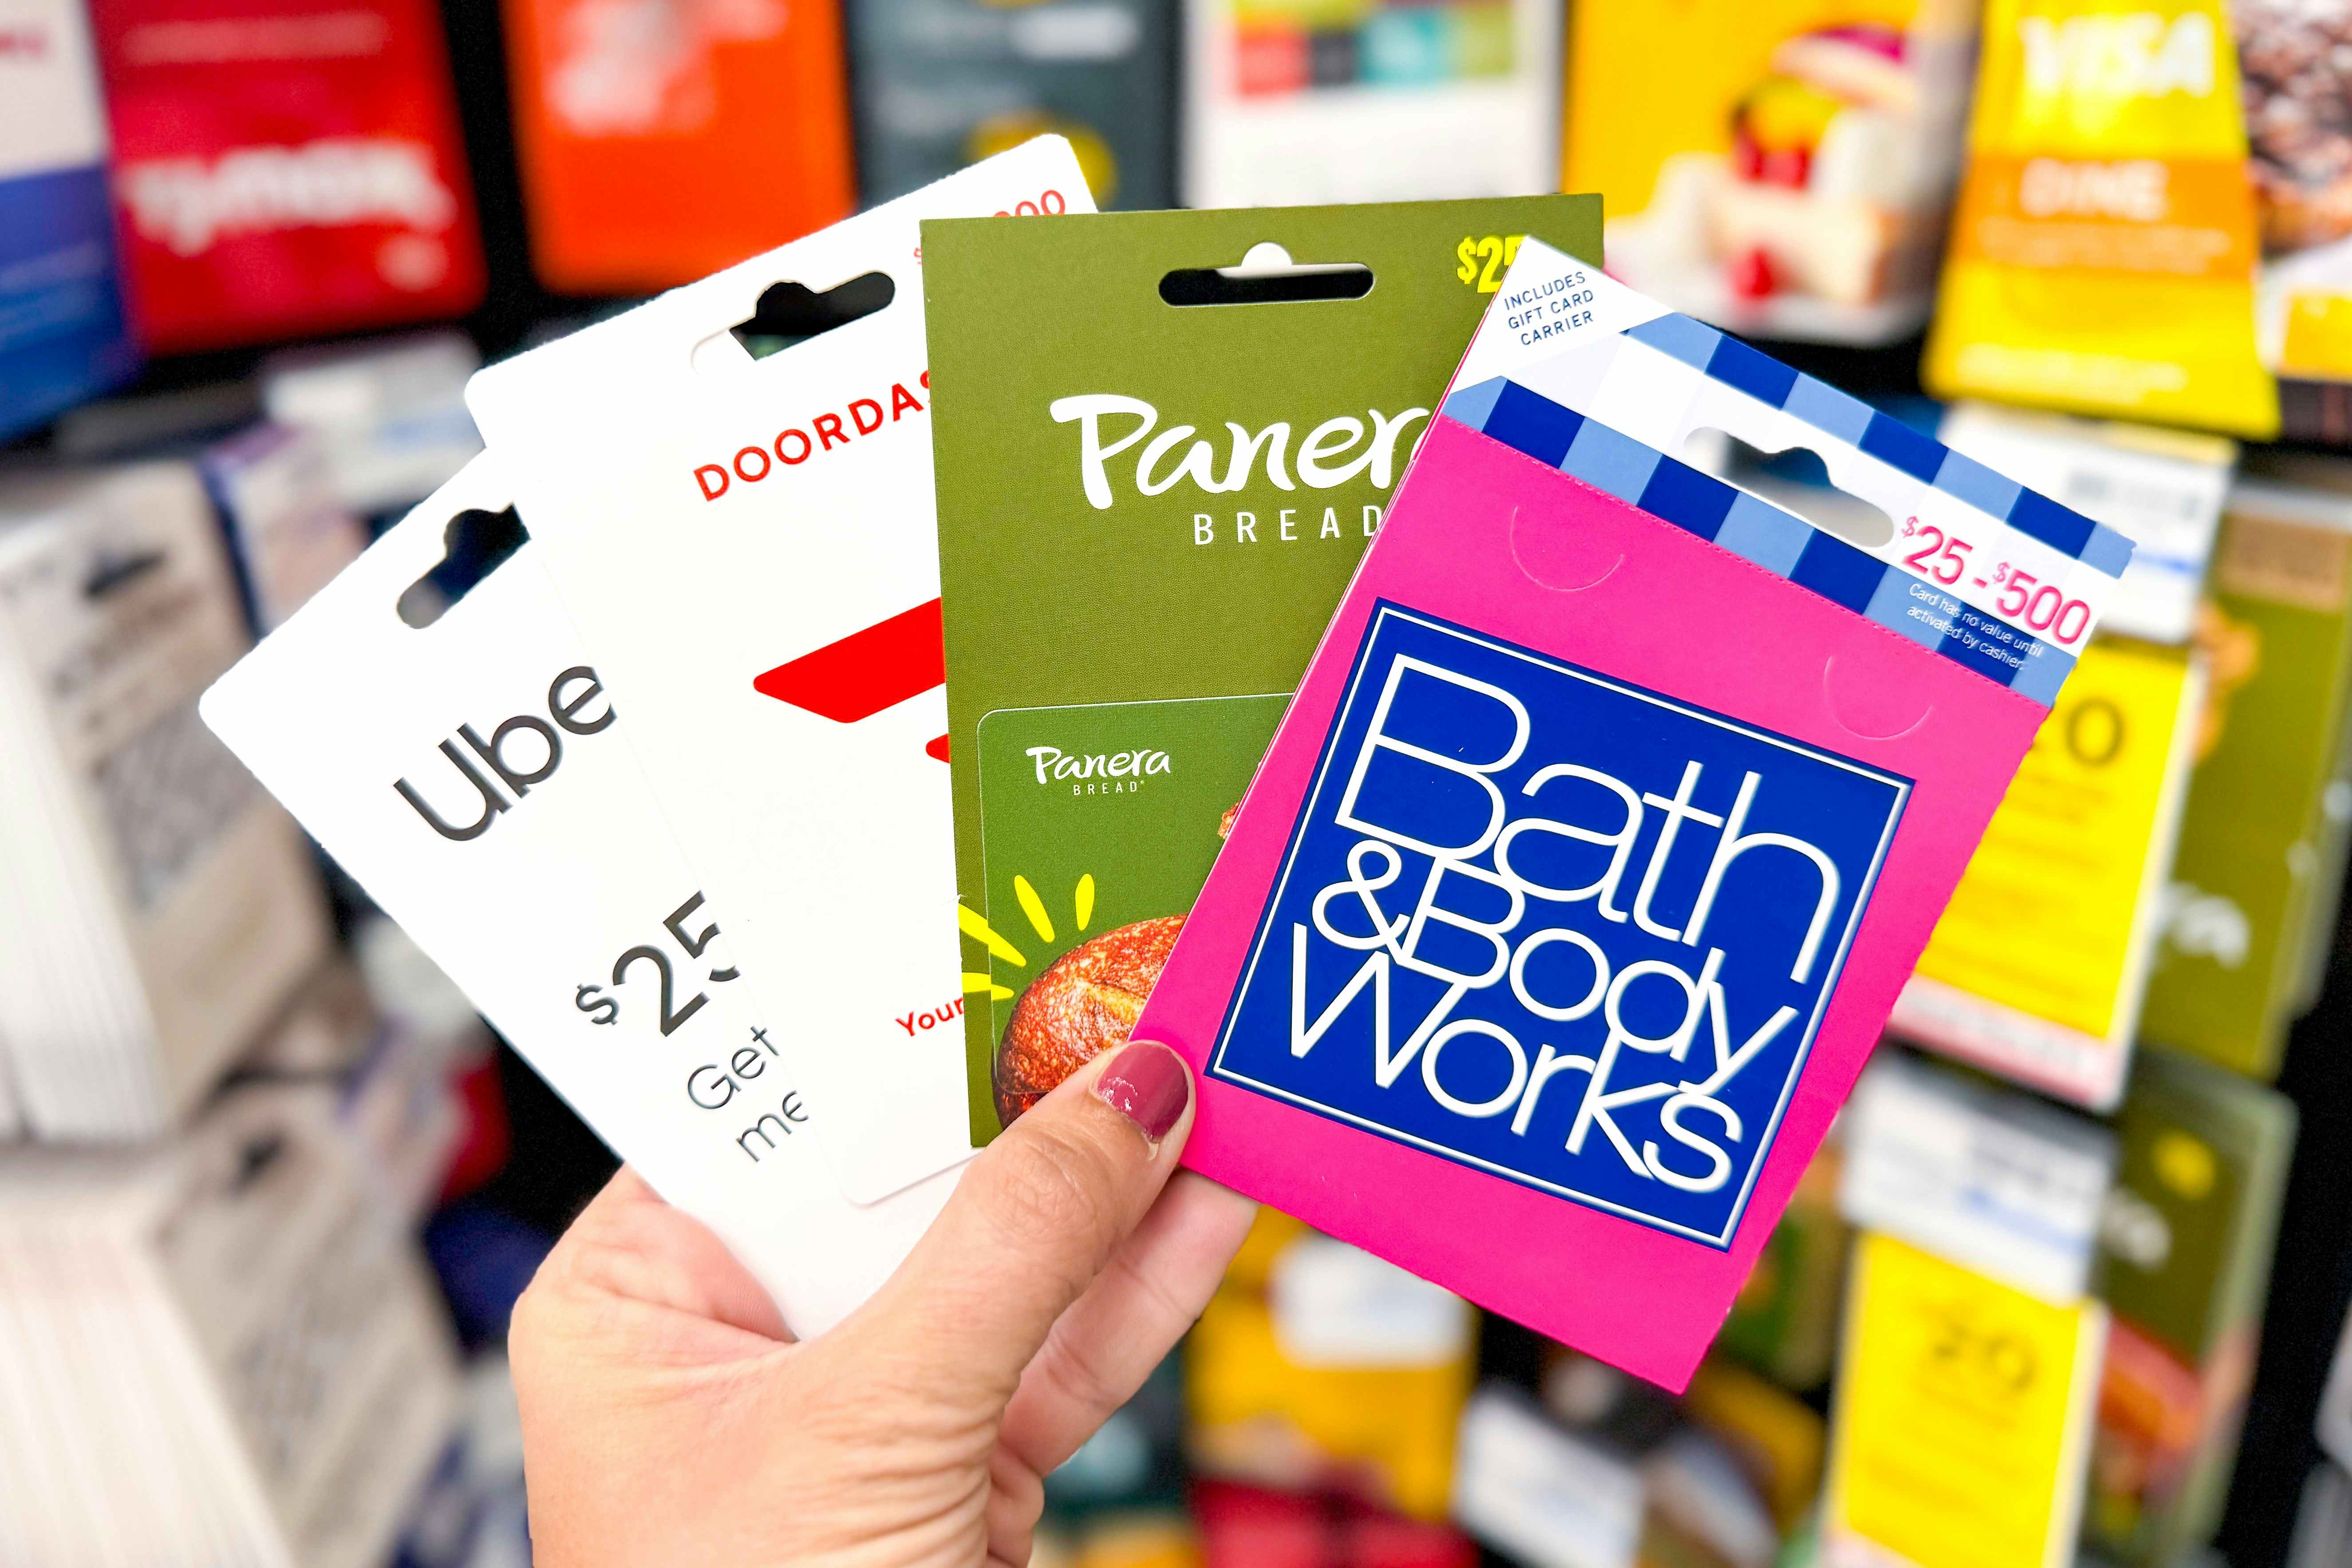 Gift Card Deals on Amazon — Score 20% Off Bath & Body Works and Gap